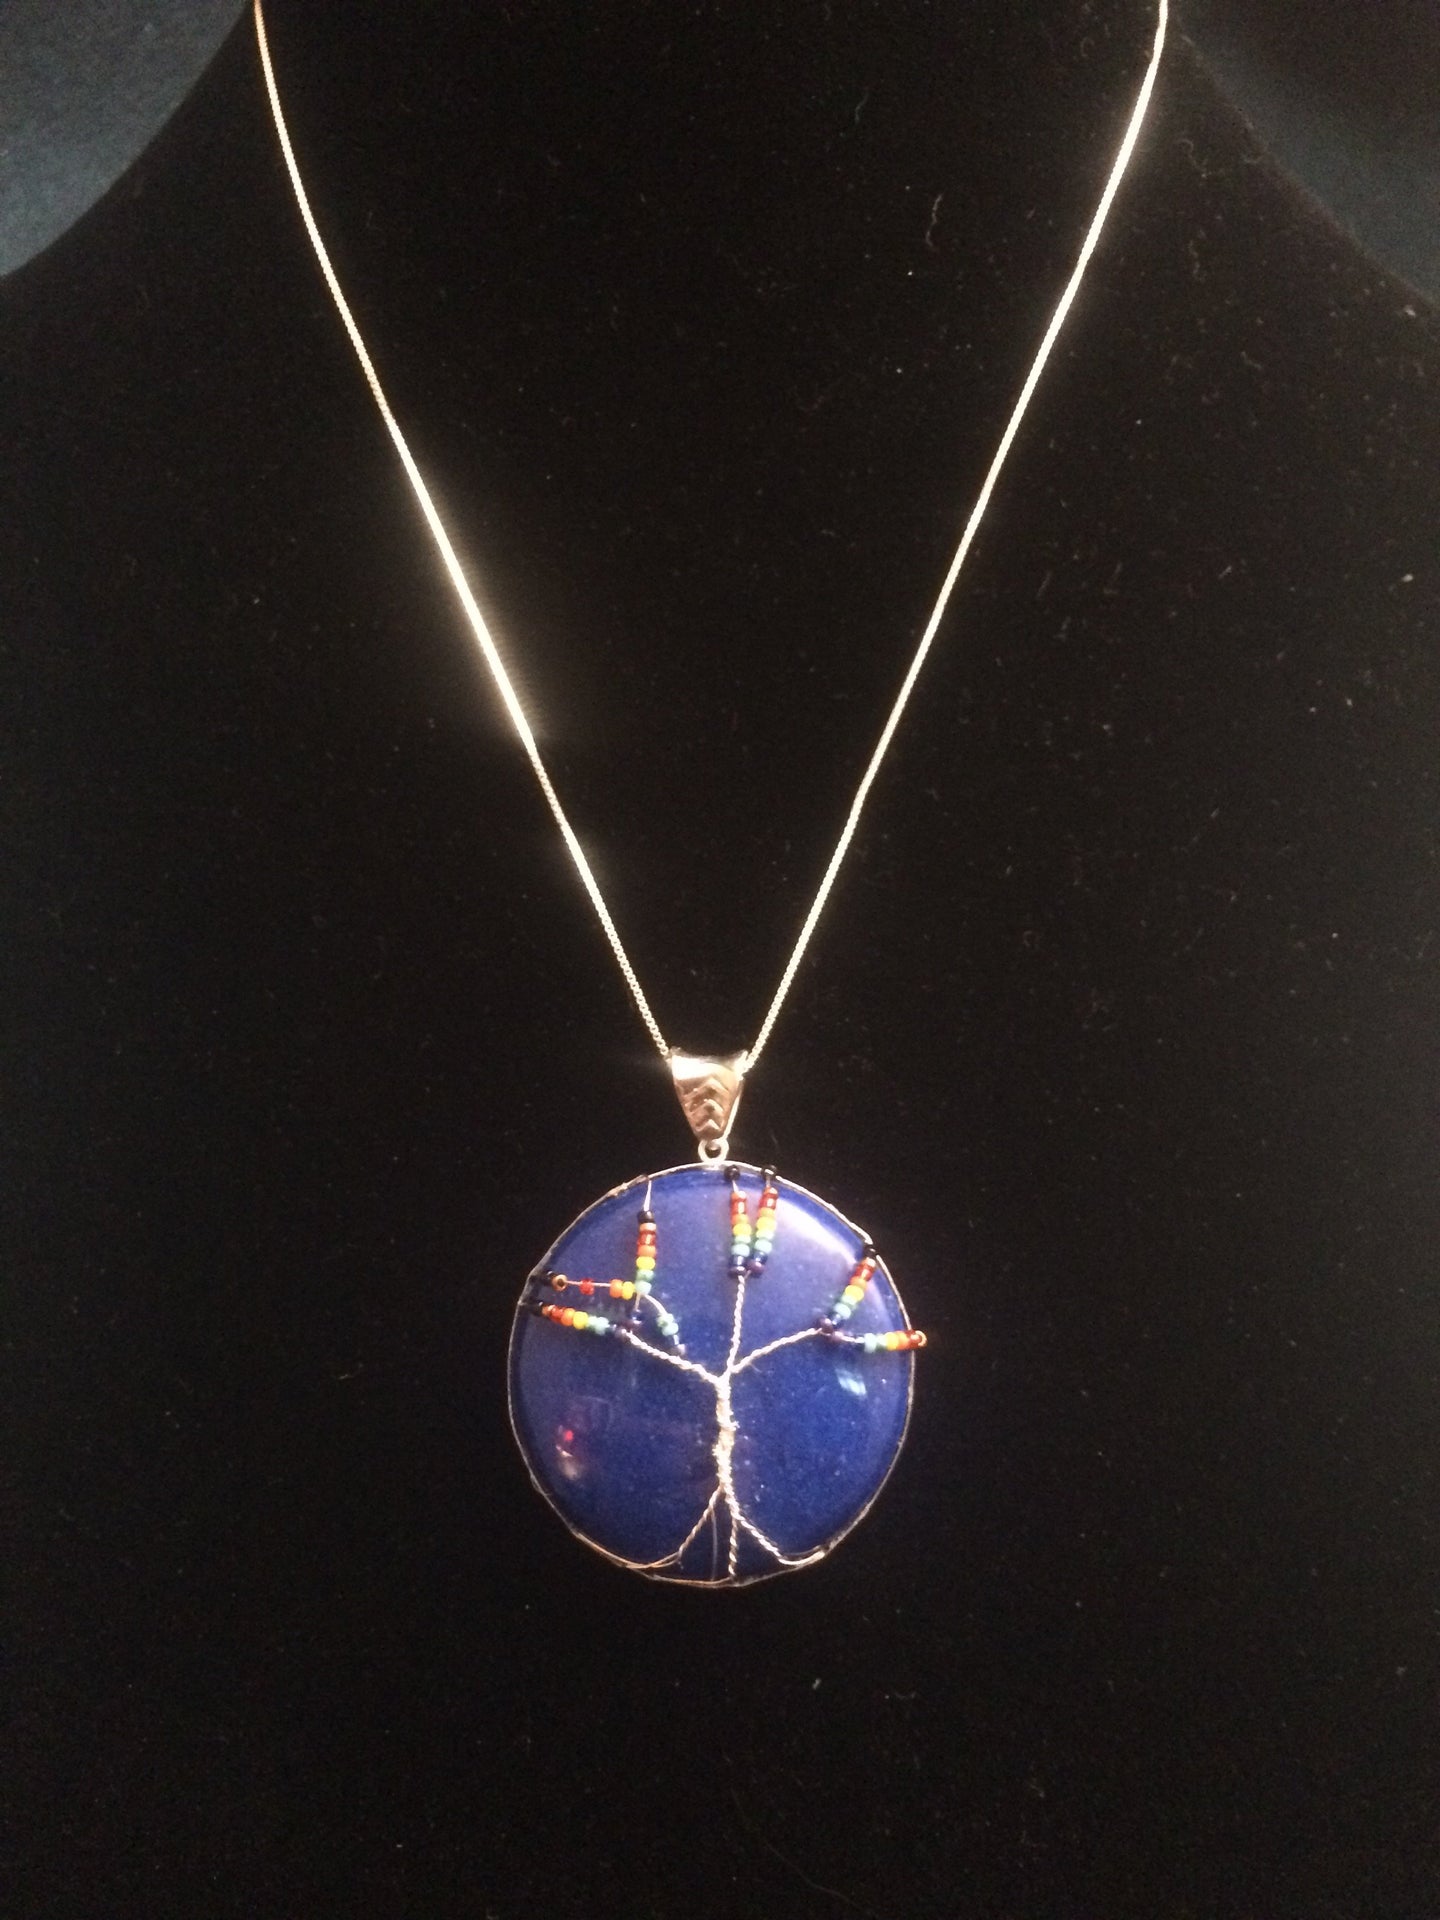 This tree of life uses the inclusive rainbow as the color theme made with glass seed beads on fine silver wire on a silver chain. The background is a cabochon of Mountain Jade (dolomite marble) which has been dyed to its color.